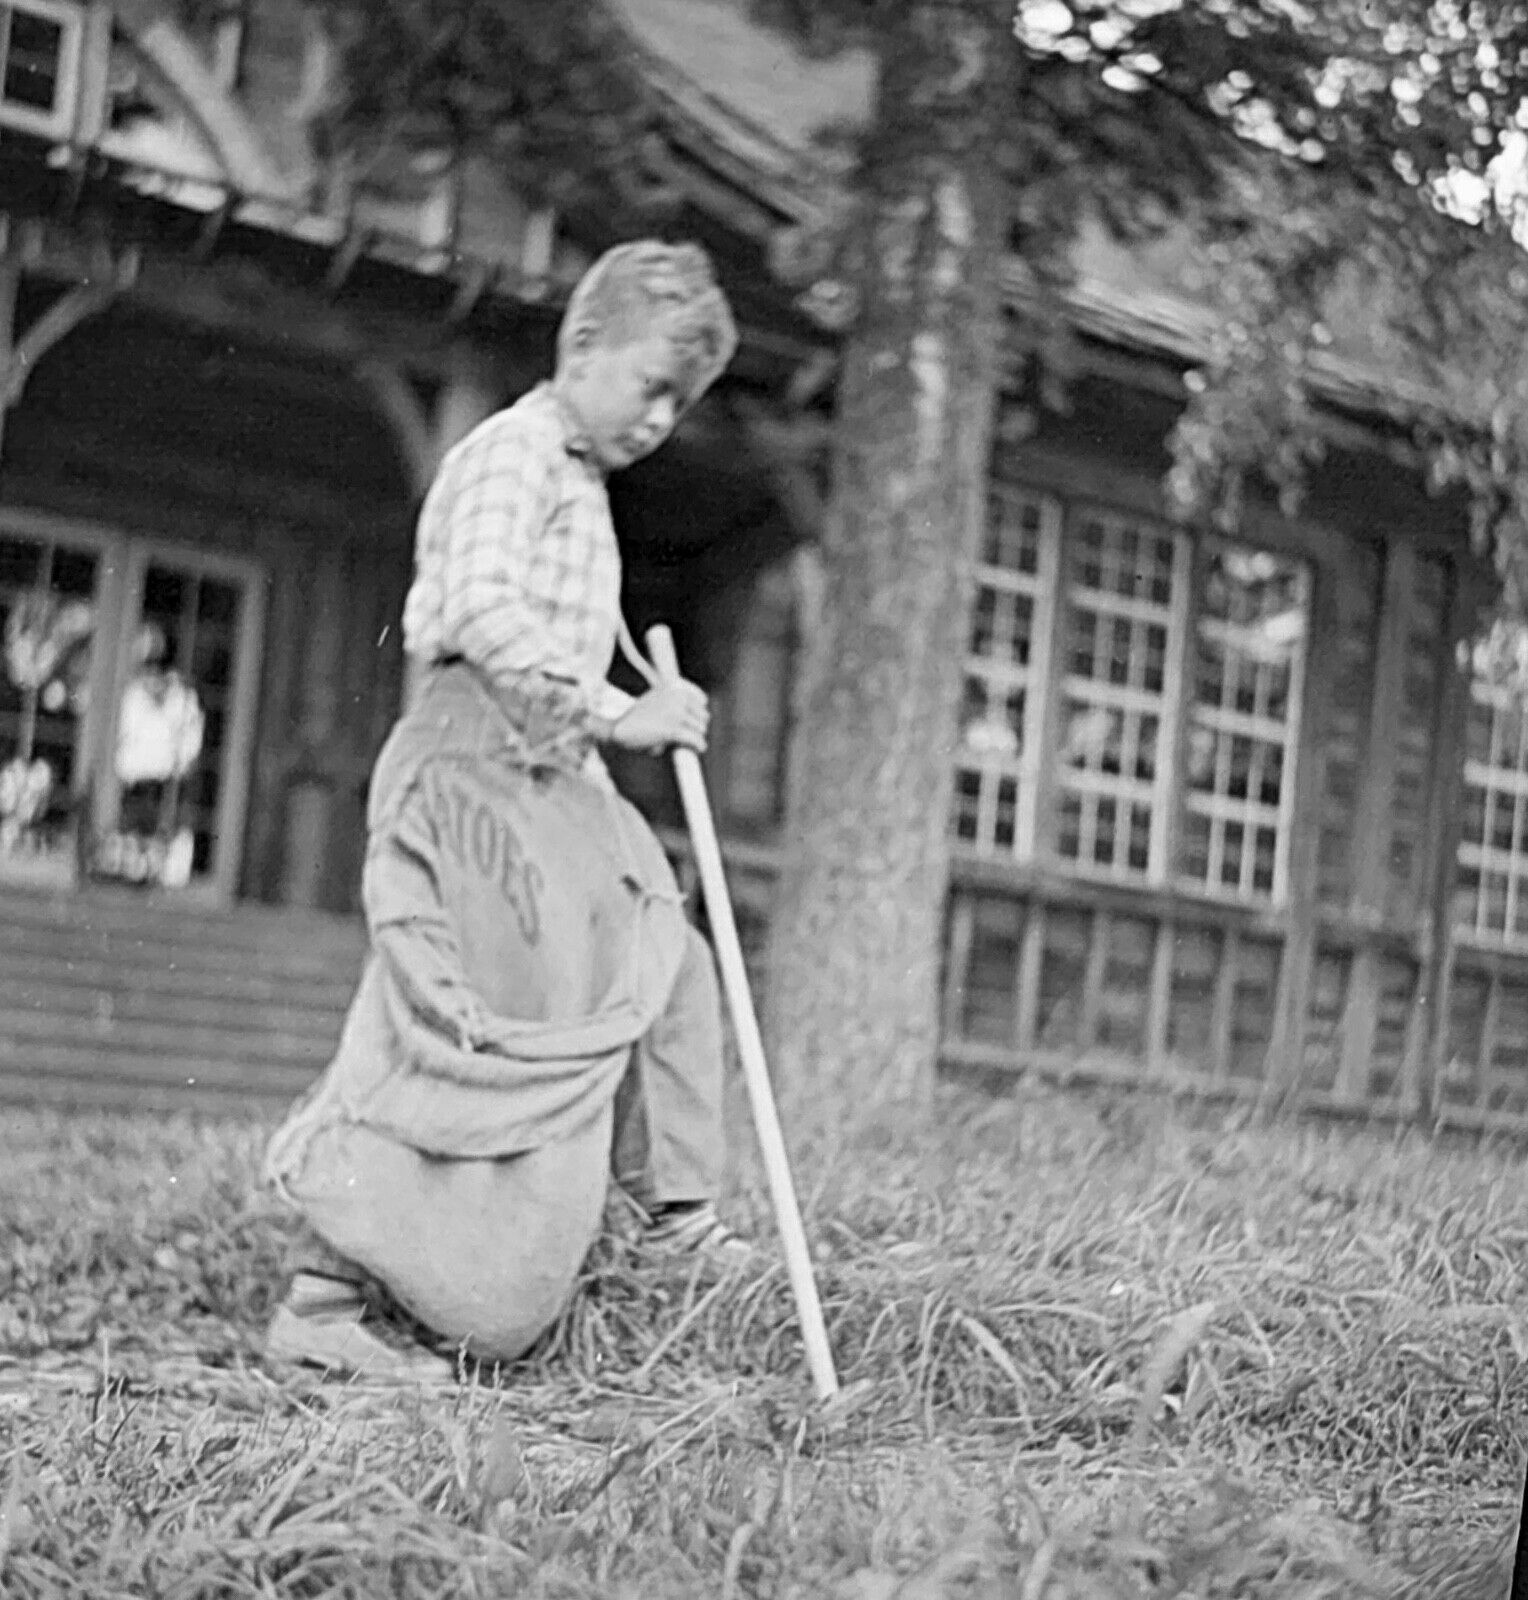 VINTAGE BW PHOTO NEGATIVE - Young Man Harvesting Potatoes using a Hoe